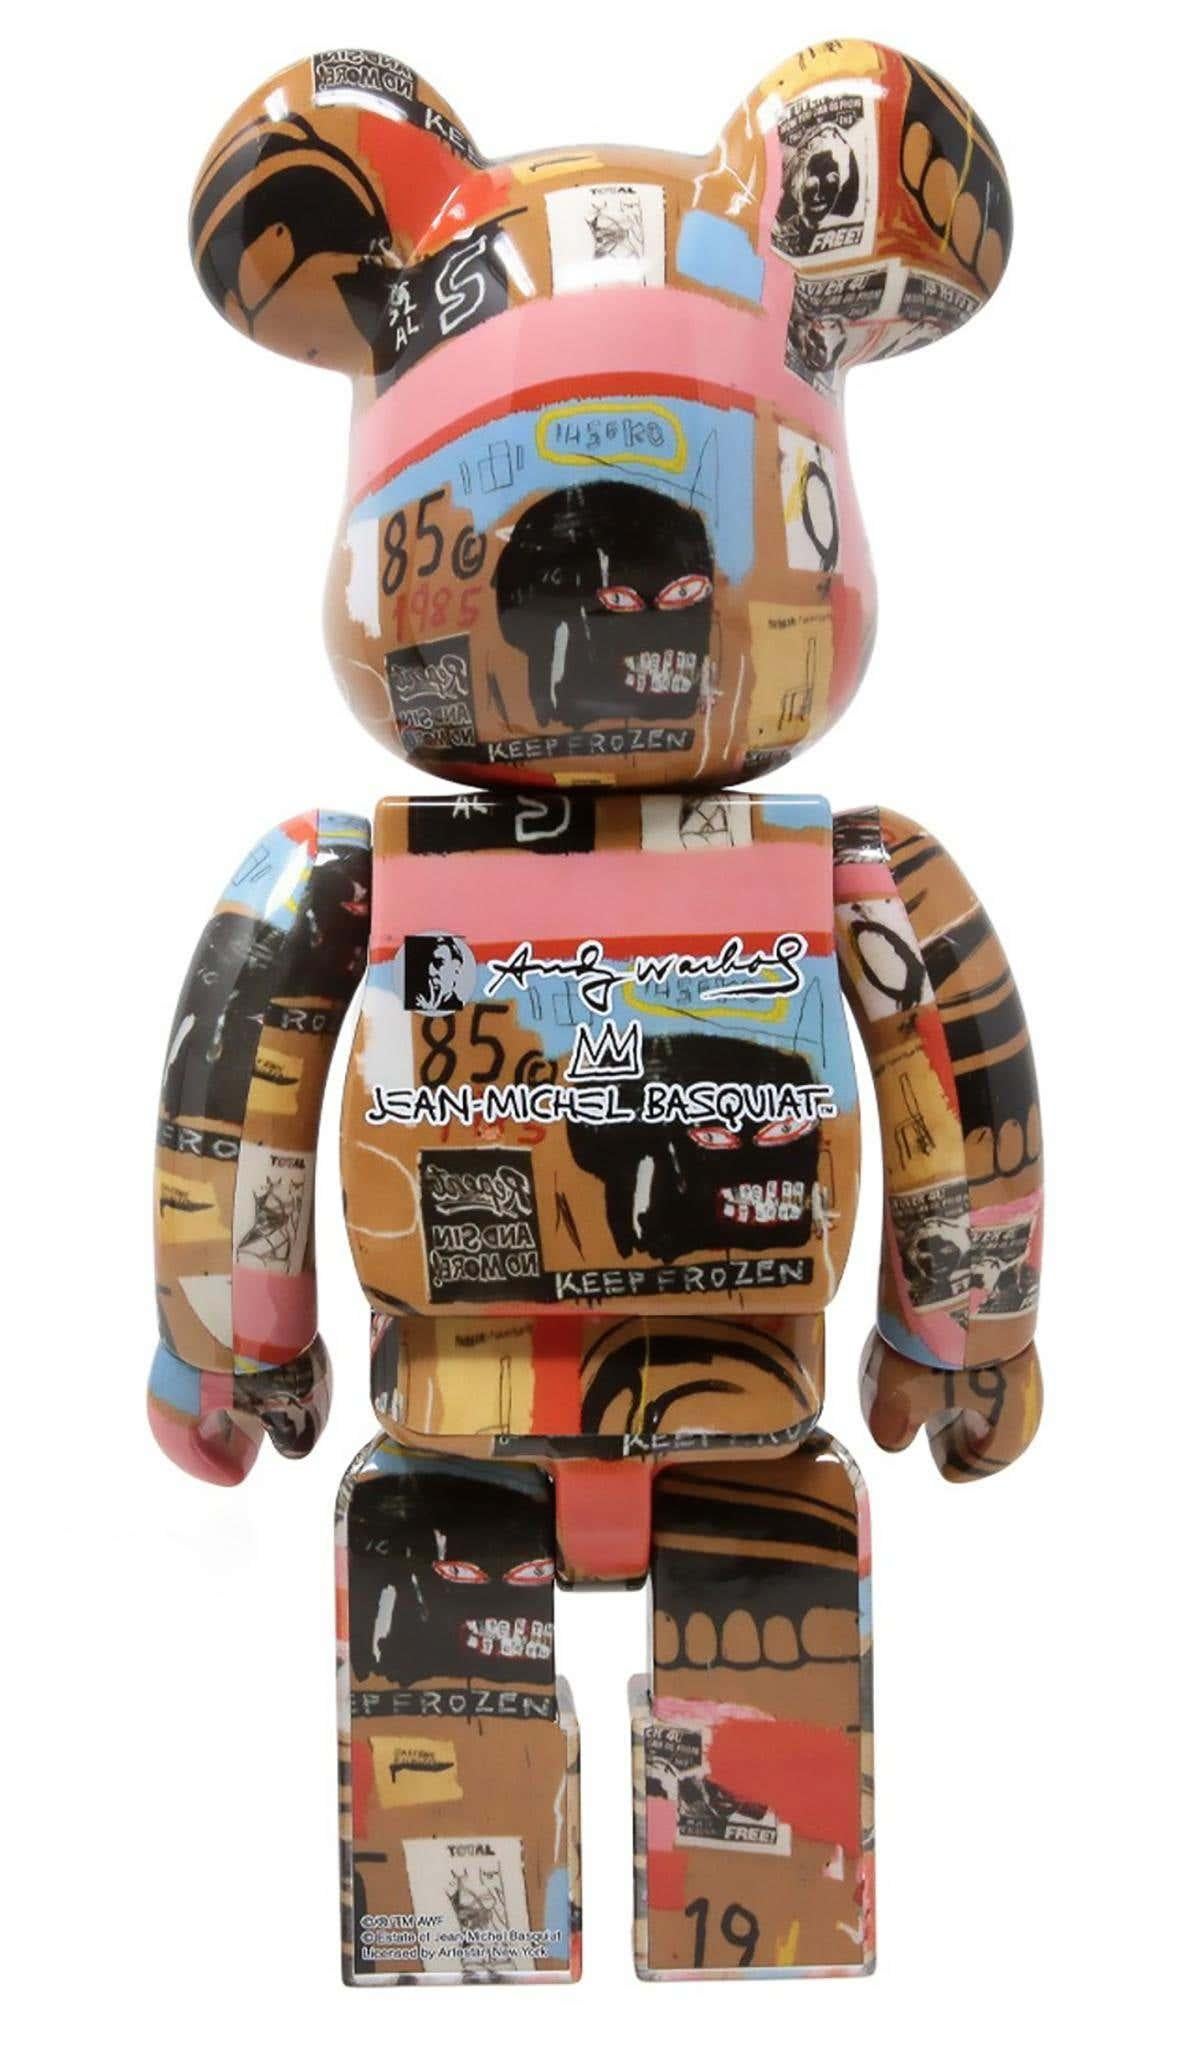 Andy Warhol & Jean-Michel Basquiat Bearbrick Vinyl Figures: Set of two 400%:
Unique, timeless collectibles trademarked & licensed by the Estates of Jean-Michel Basquiat & Andy Warhol. The partnered collectibles reveal details from two of Jean-Michel